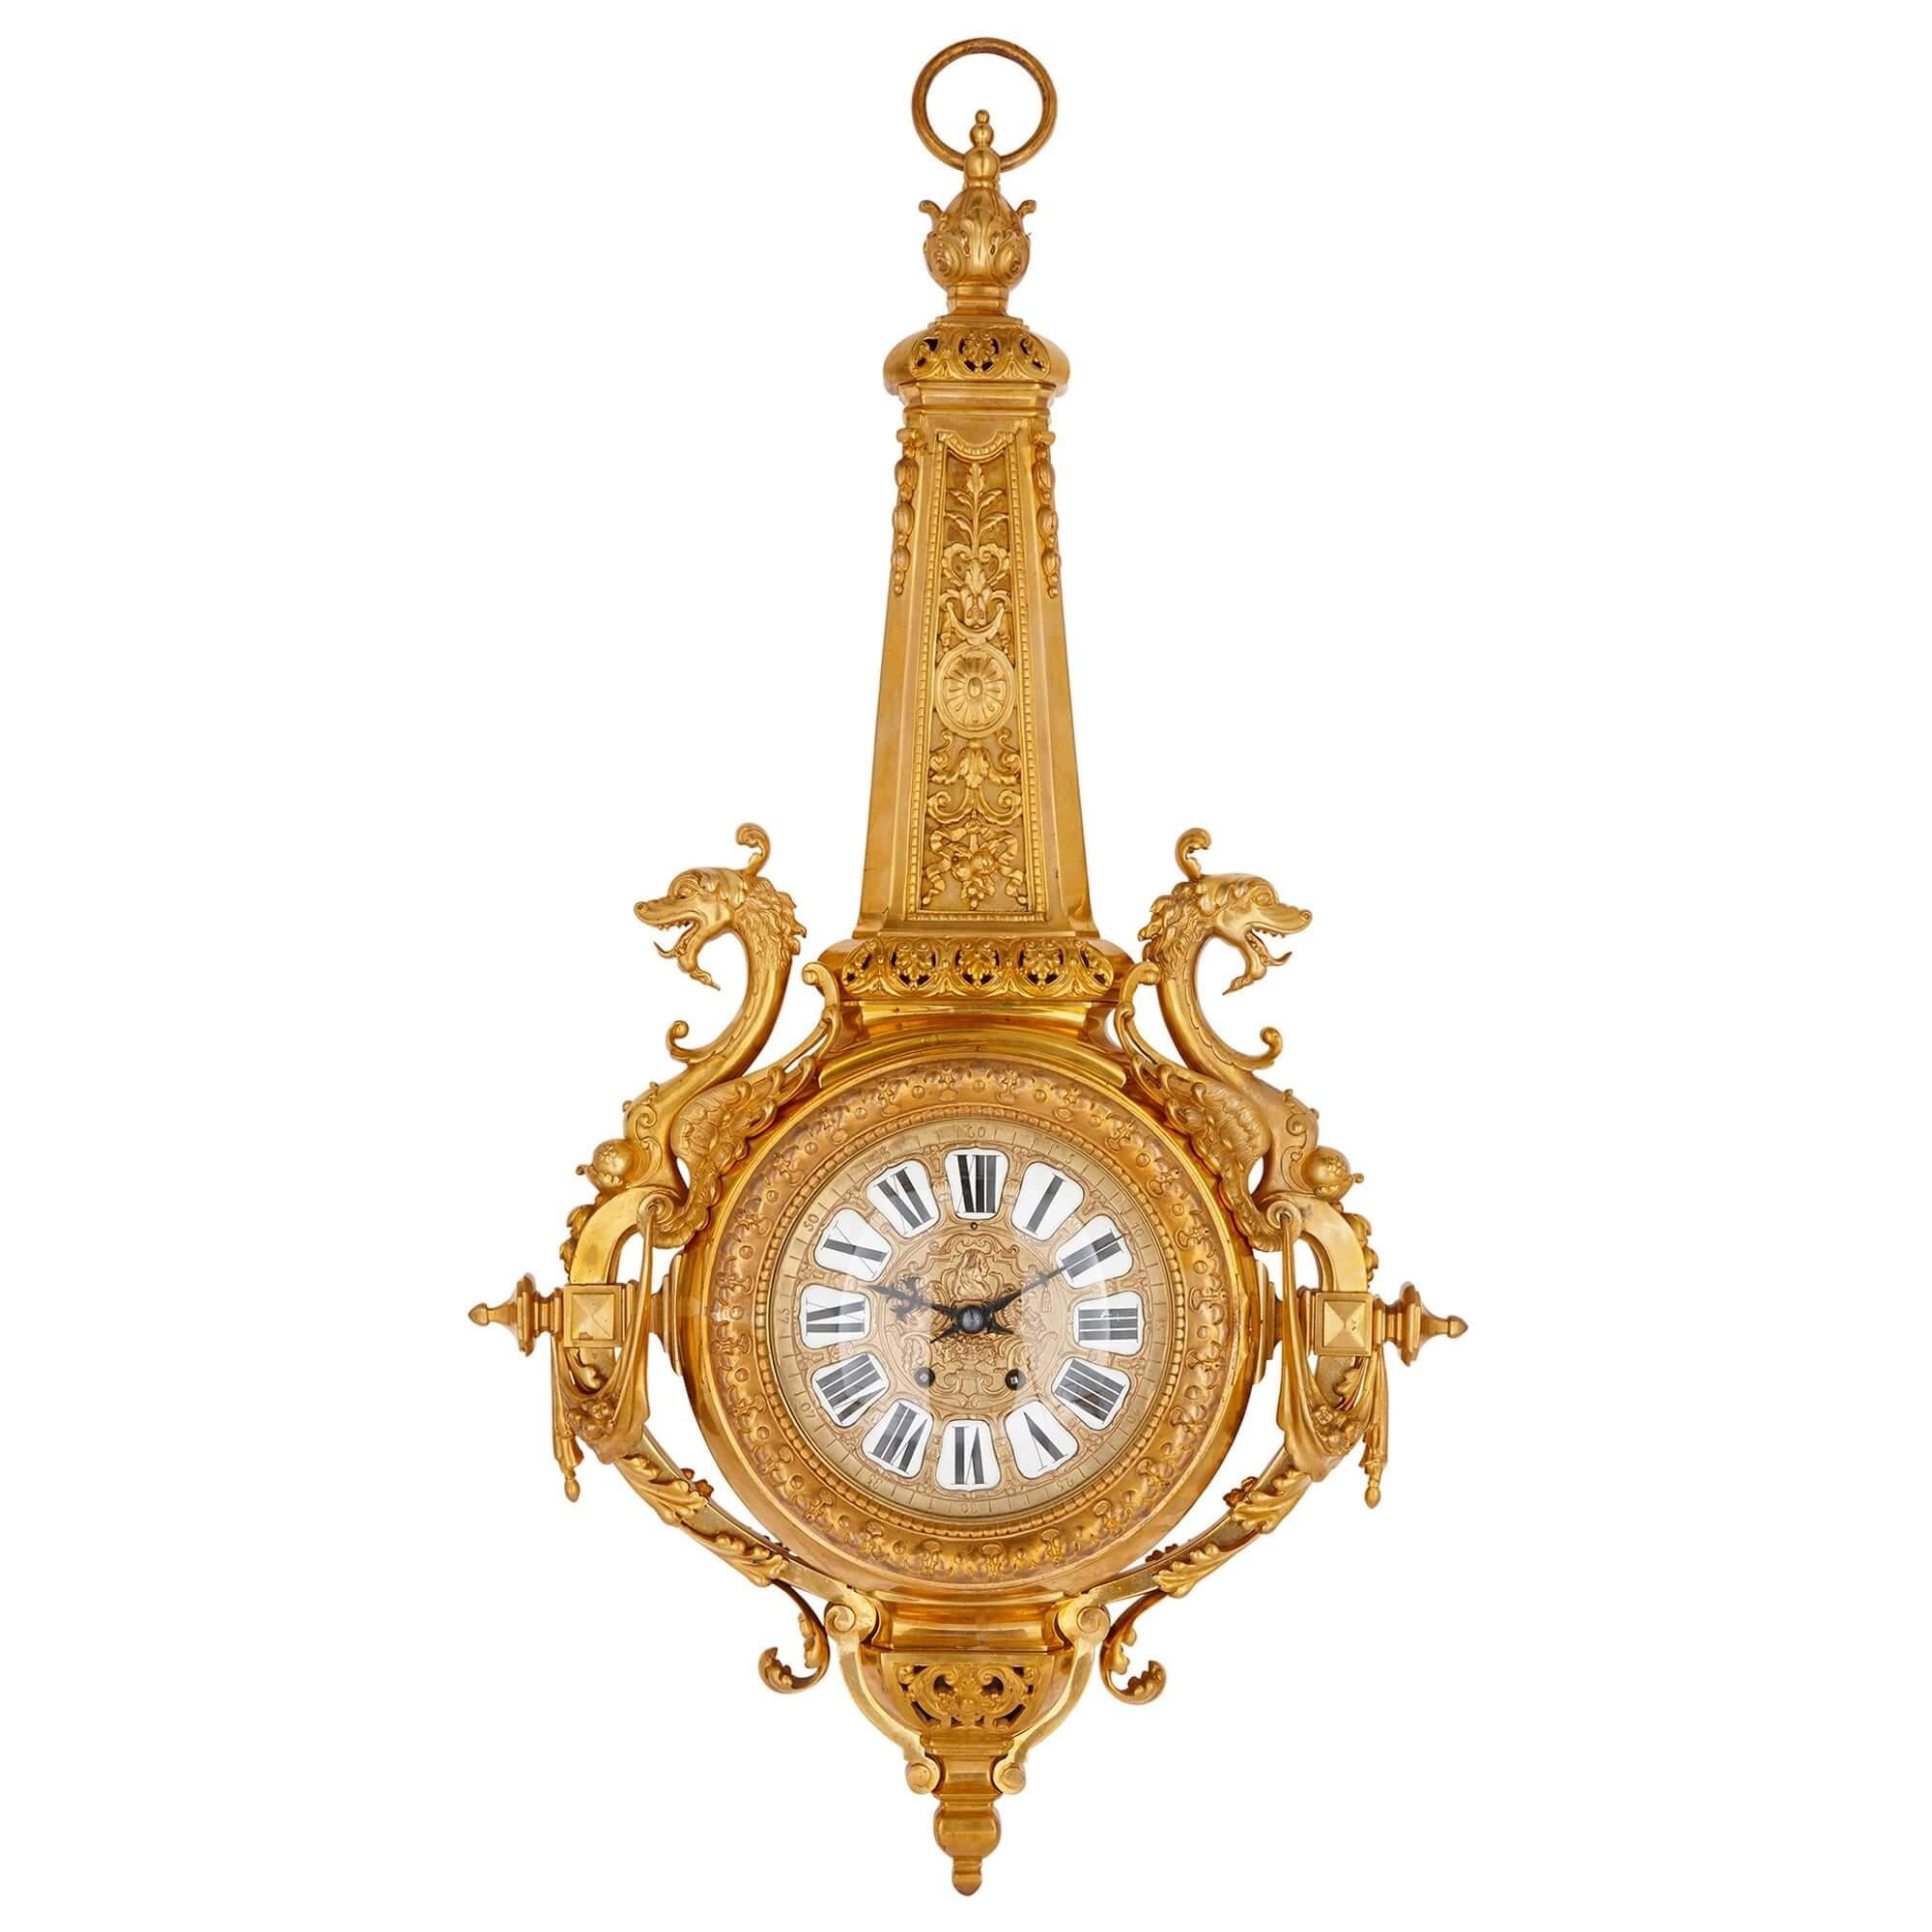 Clock and barometer set in gilt bronze by Beurdeley.
French, late 19th century.
Measures: height 98cm, width 52cm, depth 12cm.

The exceptional wall clock and barometer in this pair are wrought from gilt bronze in the eclectic Belle Epoque